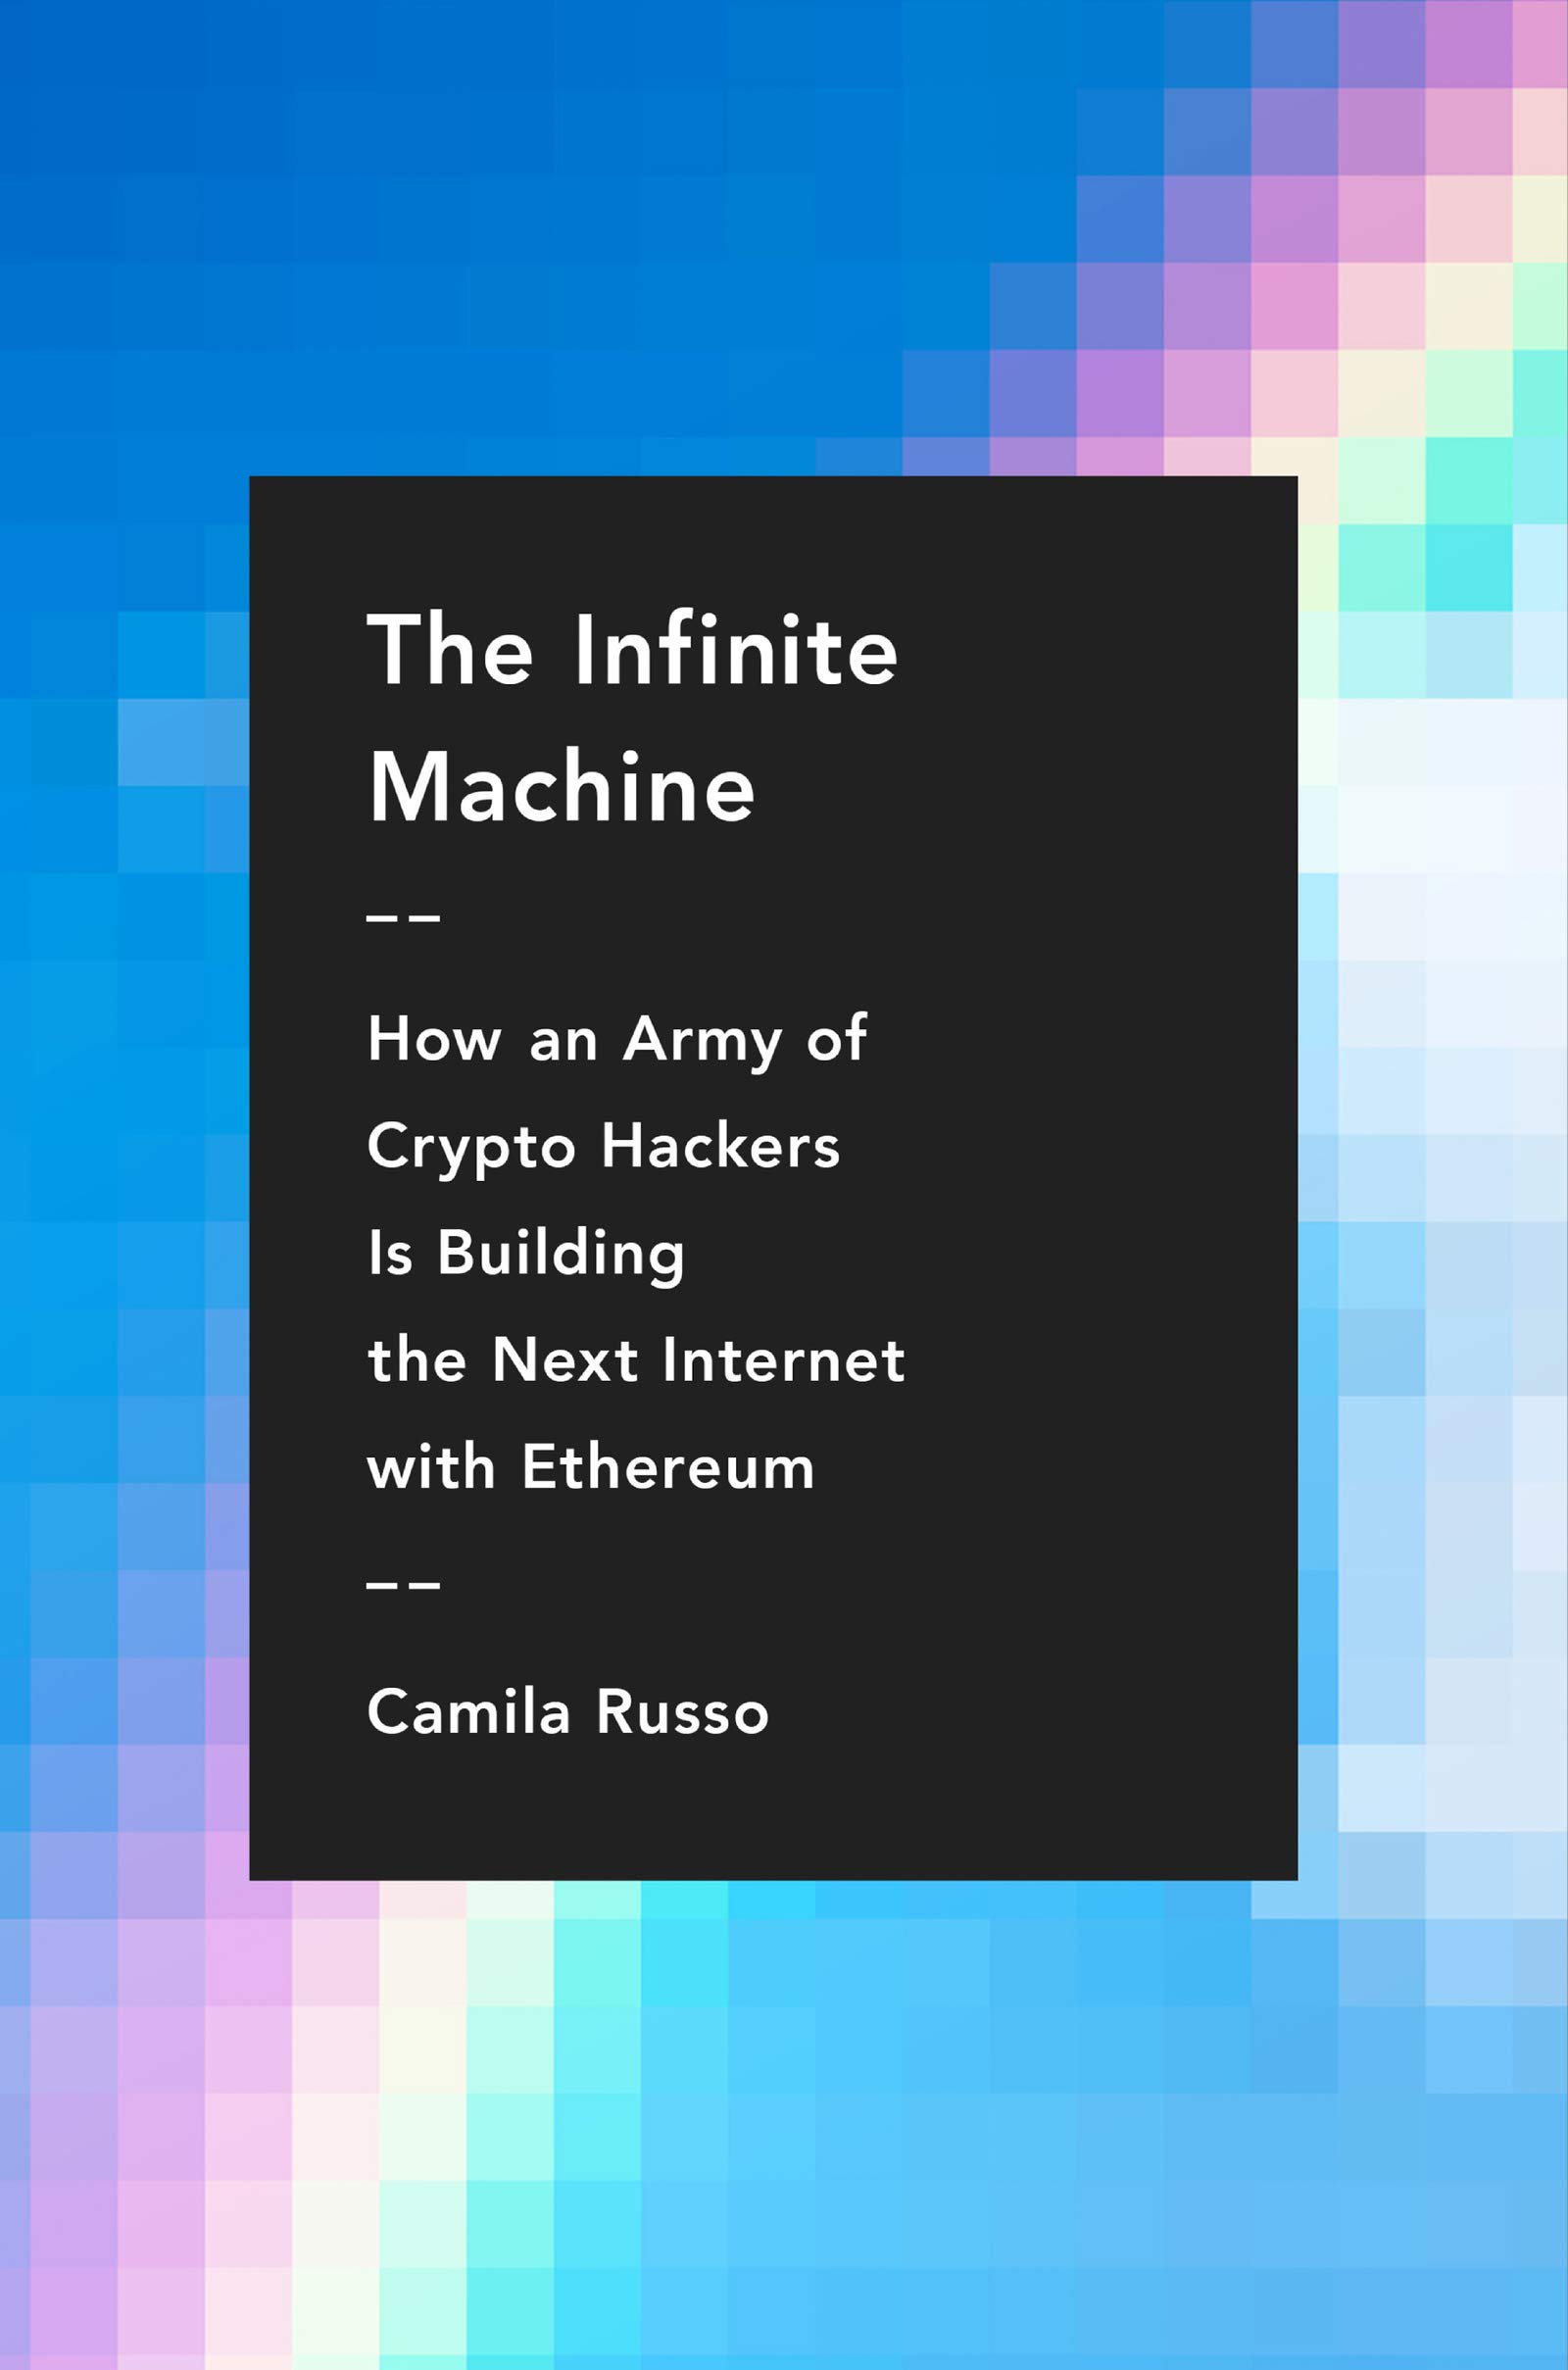 The Infinite Machine: How an Army of Crypto-hackers Is Building the Next Internet with Ethereum (eBook) by Camila Russo $1.99